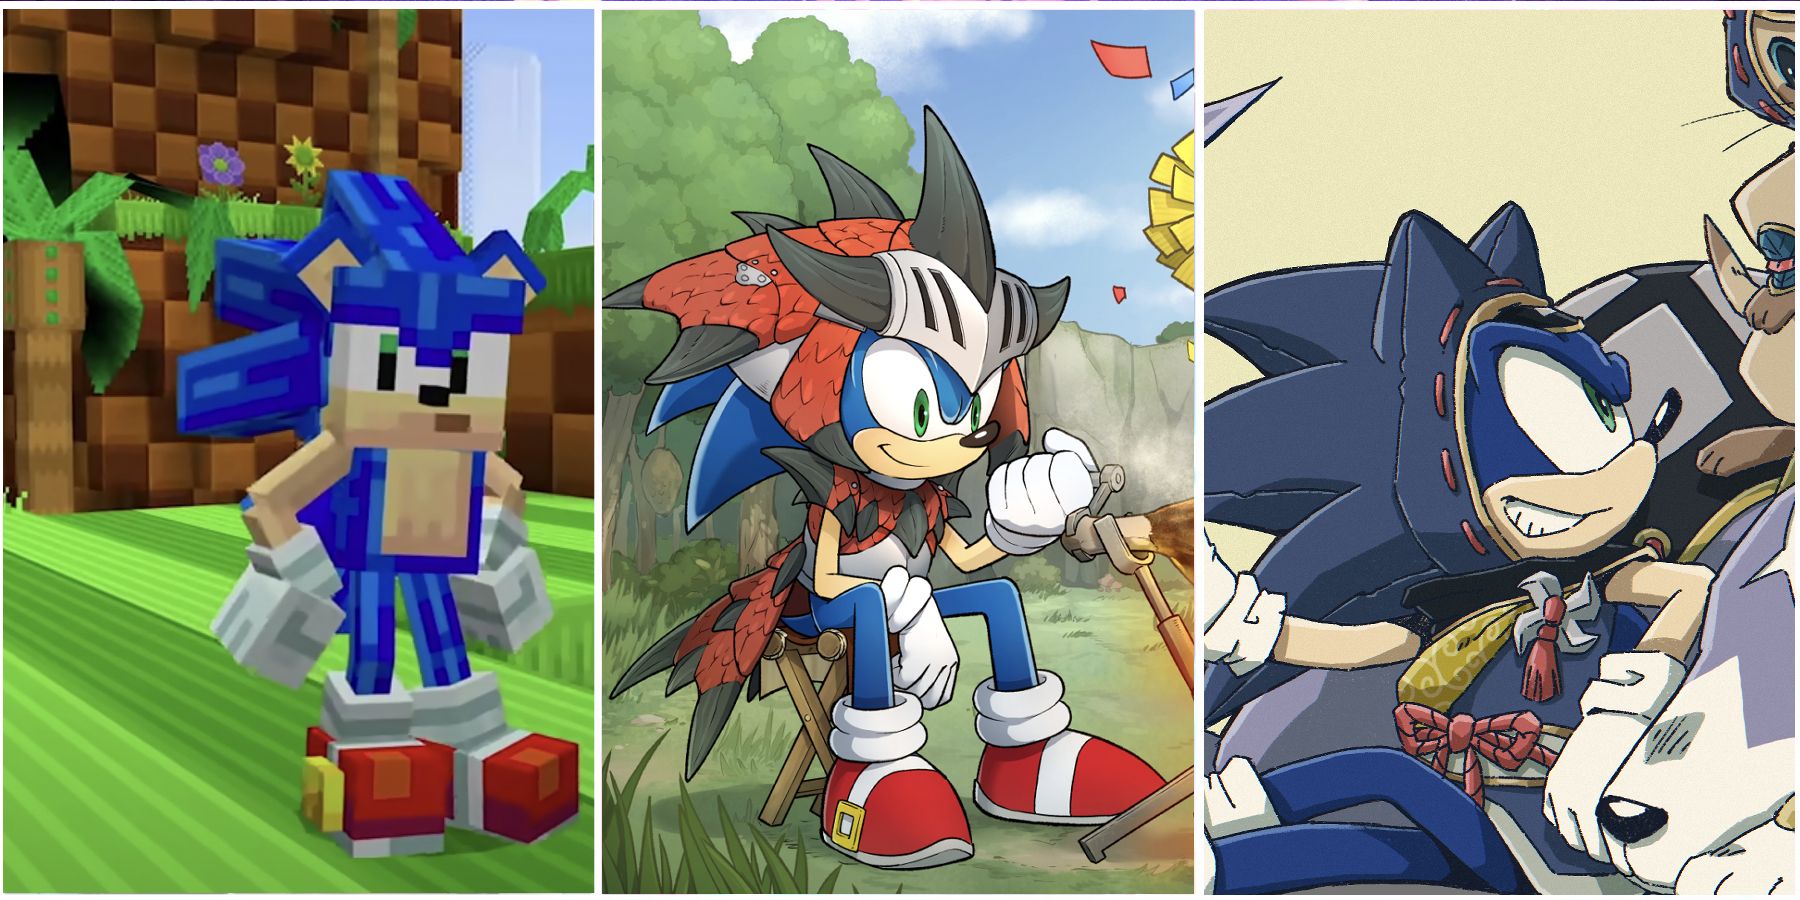 sonic-in-minecraft-rathalos-armor-and-kamura-village-outfit